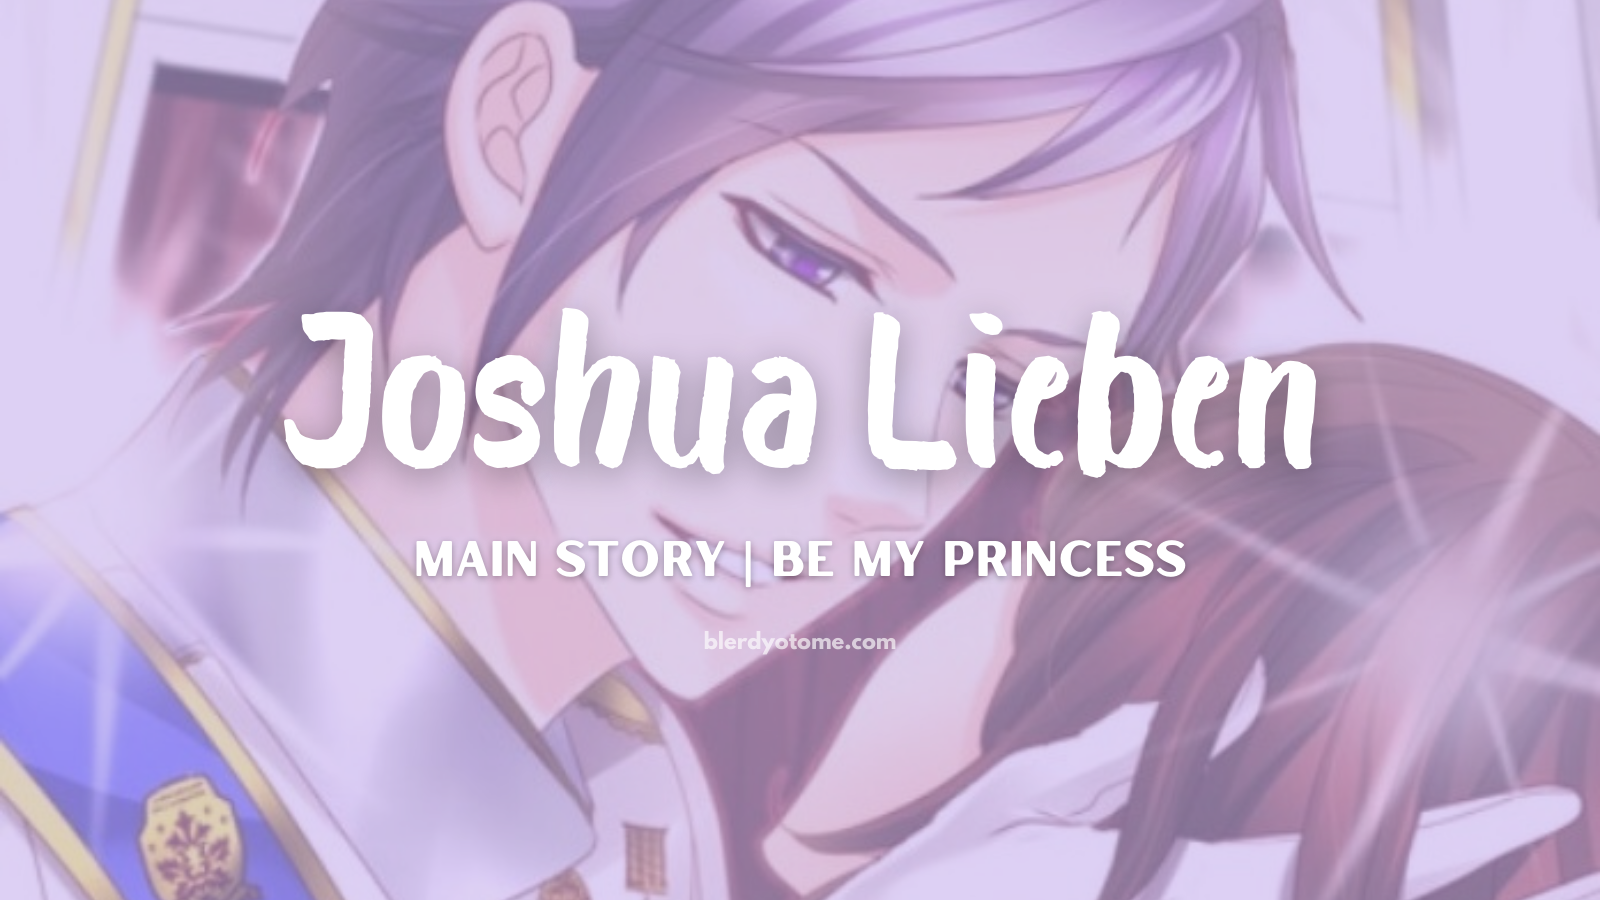 Be My Princess | Joshua Lieben Review: The Stubborn Prince That Stole My Heart